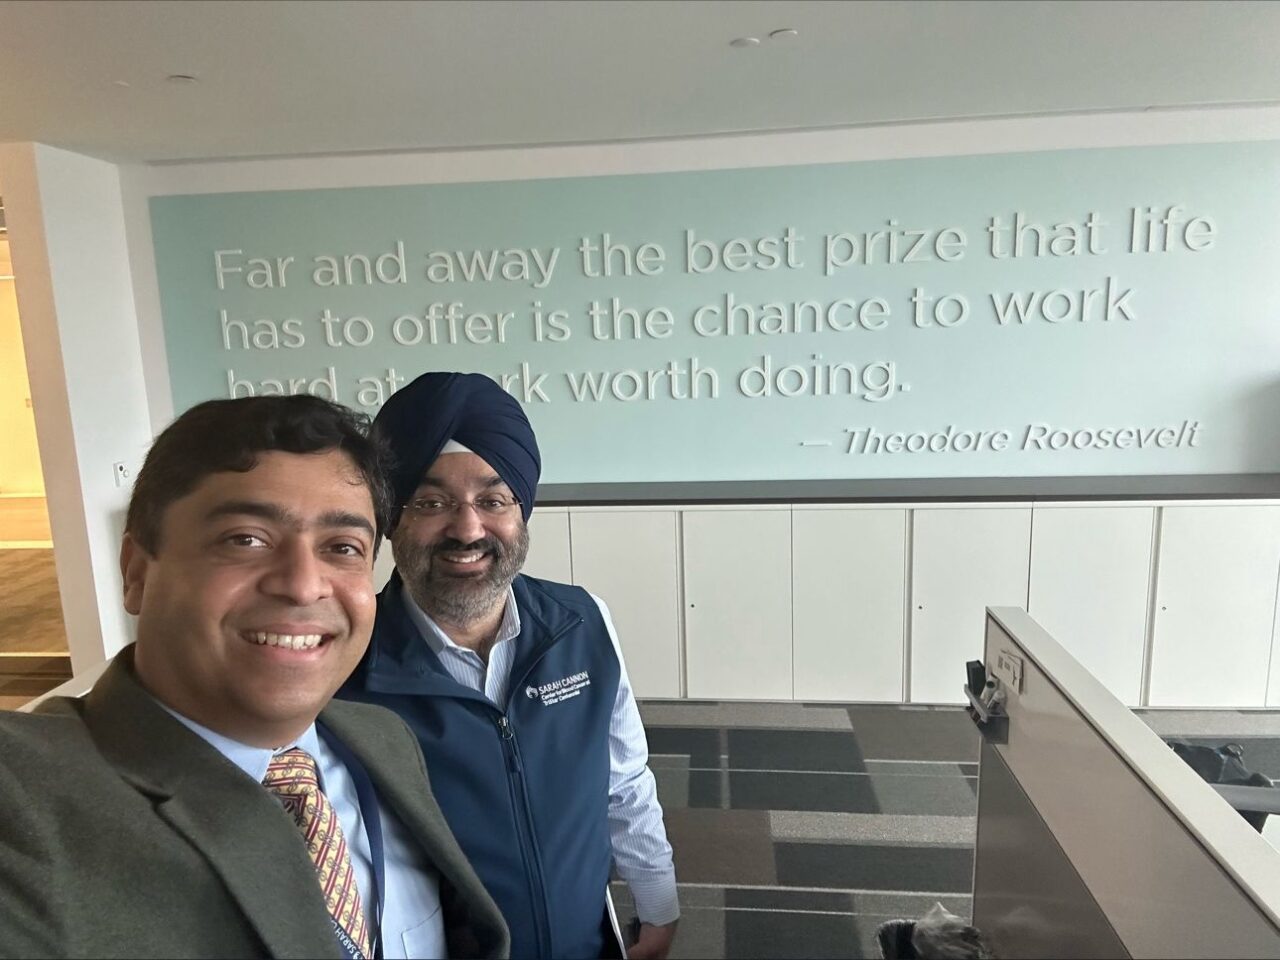 Vivek Subbiah: ‘Far and away the best prize that life offers is the chance to work hard at work worth doing’ — Theodore Roosevelt